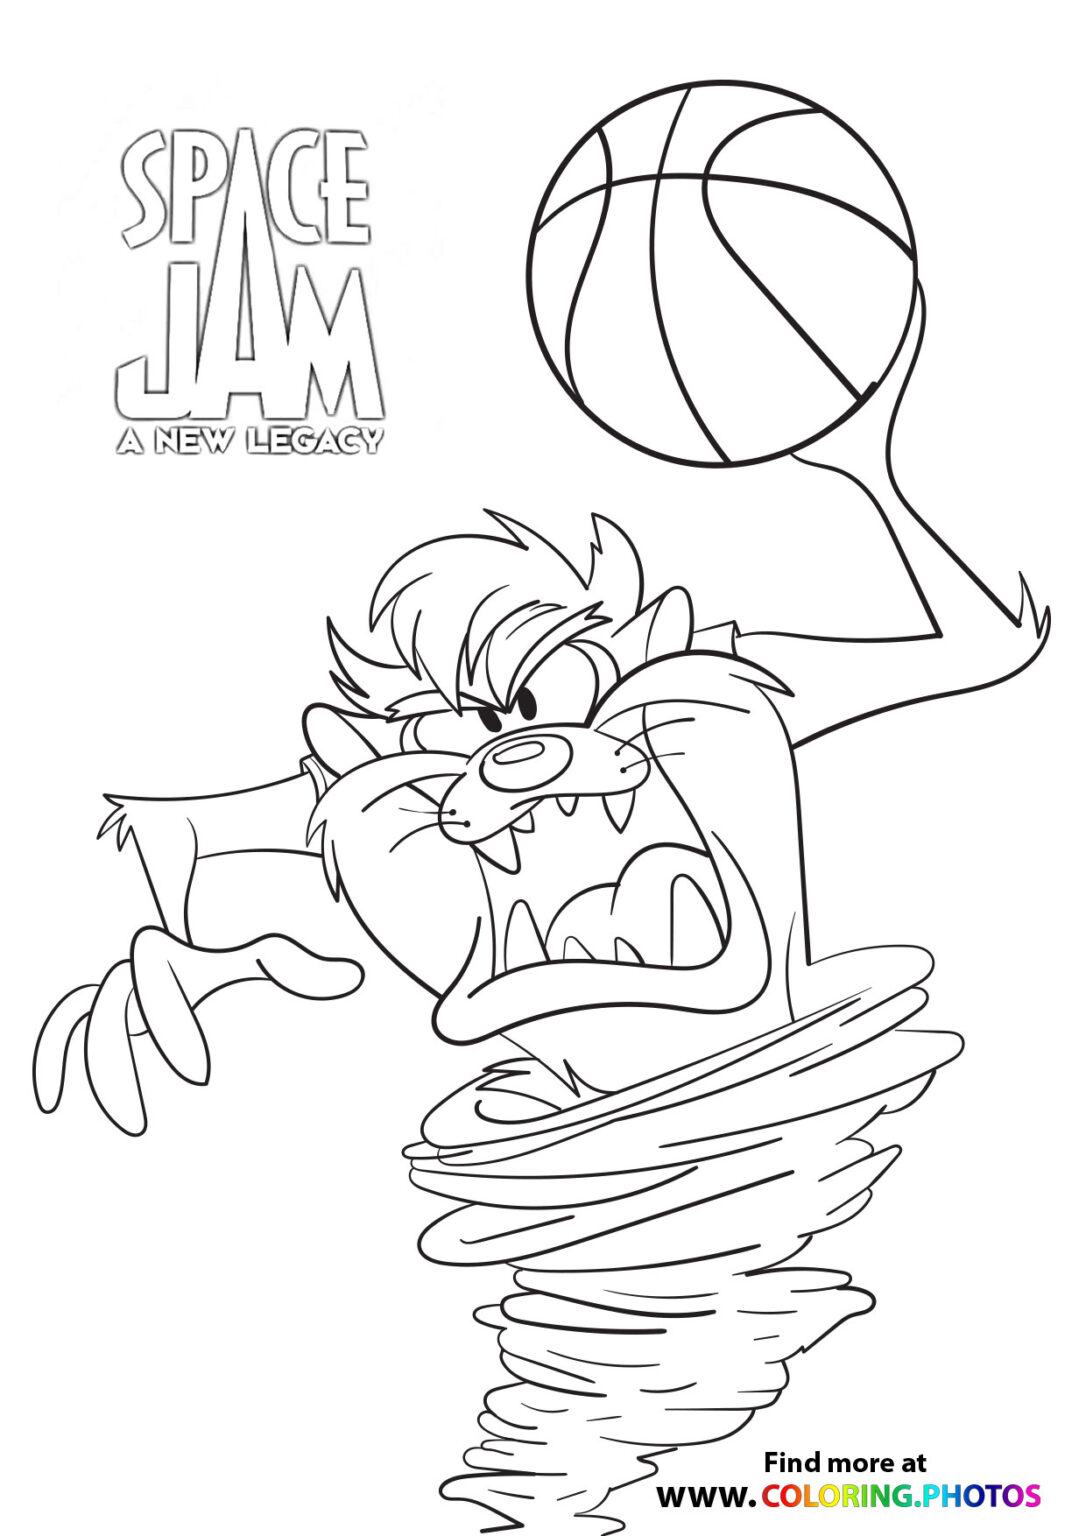 space-jam-2-a-new-legacy-coloring-pages-for-kids-free-coloring-page